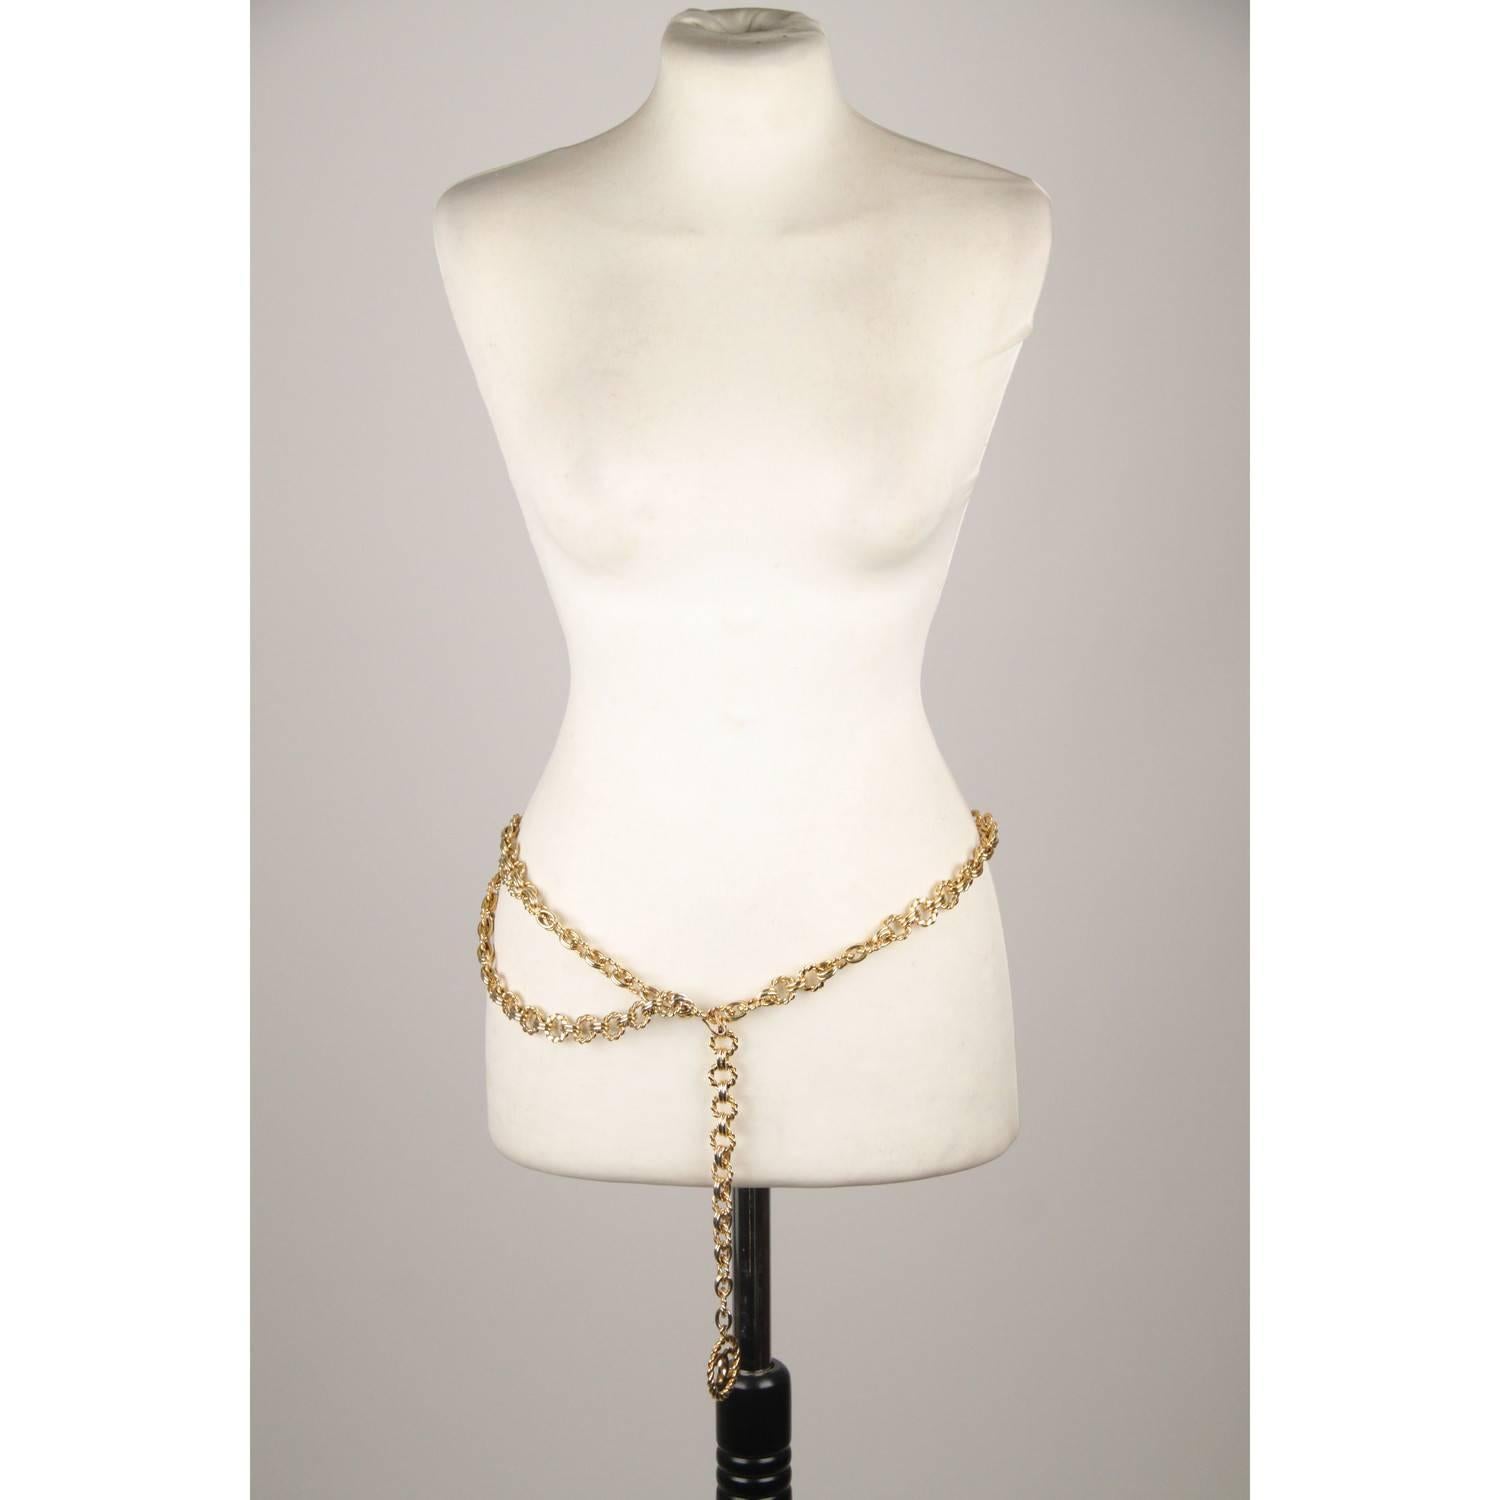 CHANEL Vintage Gold Metal RING Chain Necklace or Belt CC Pendant 1